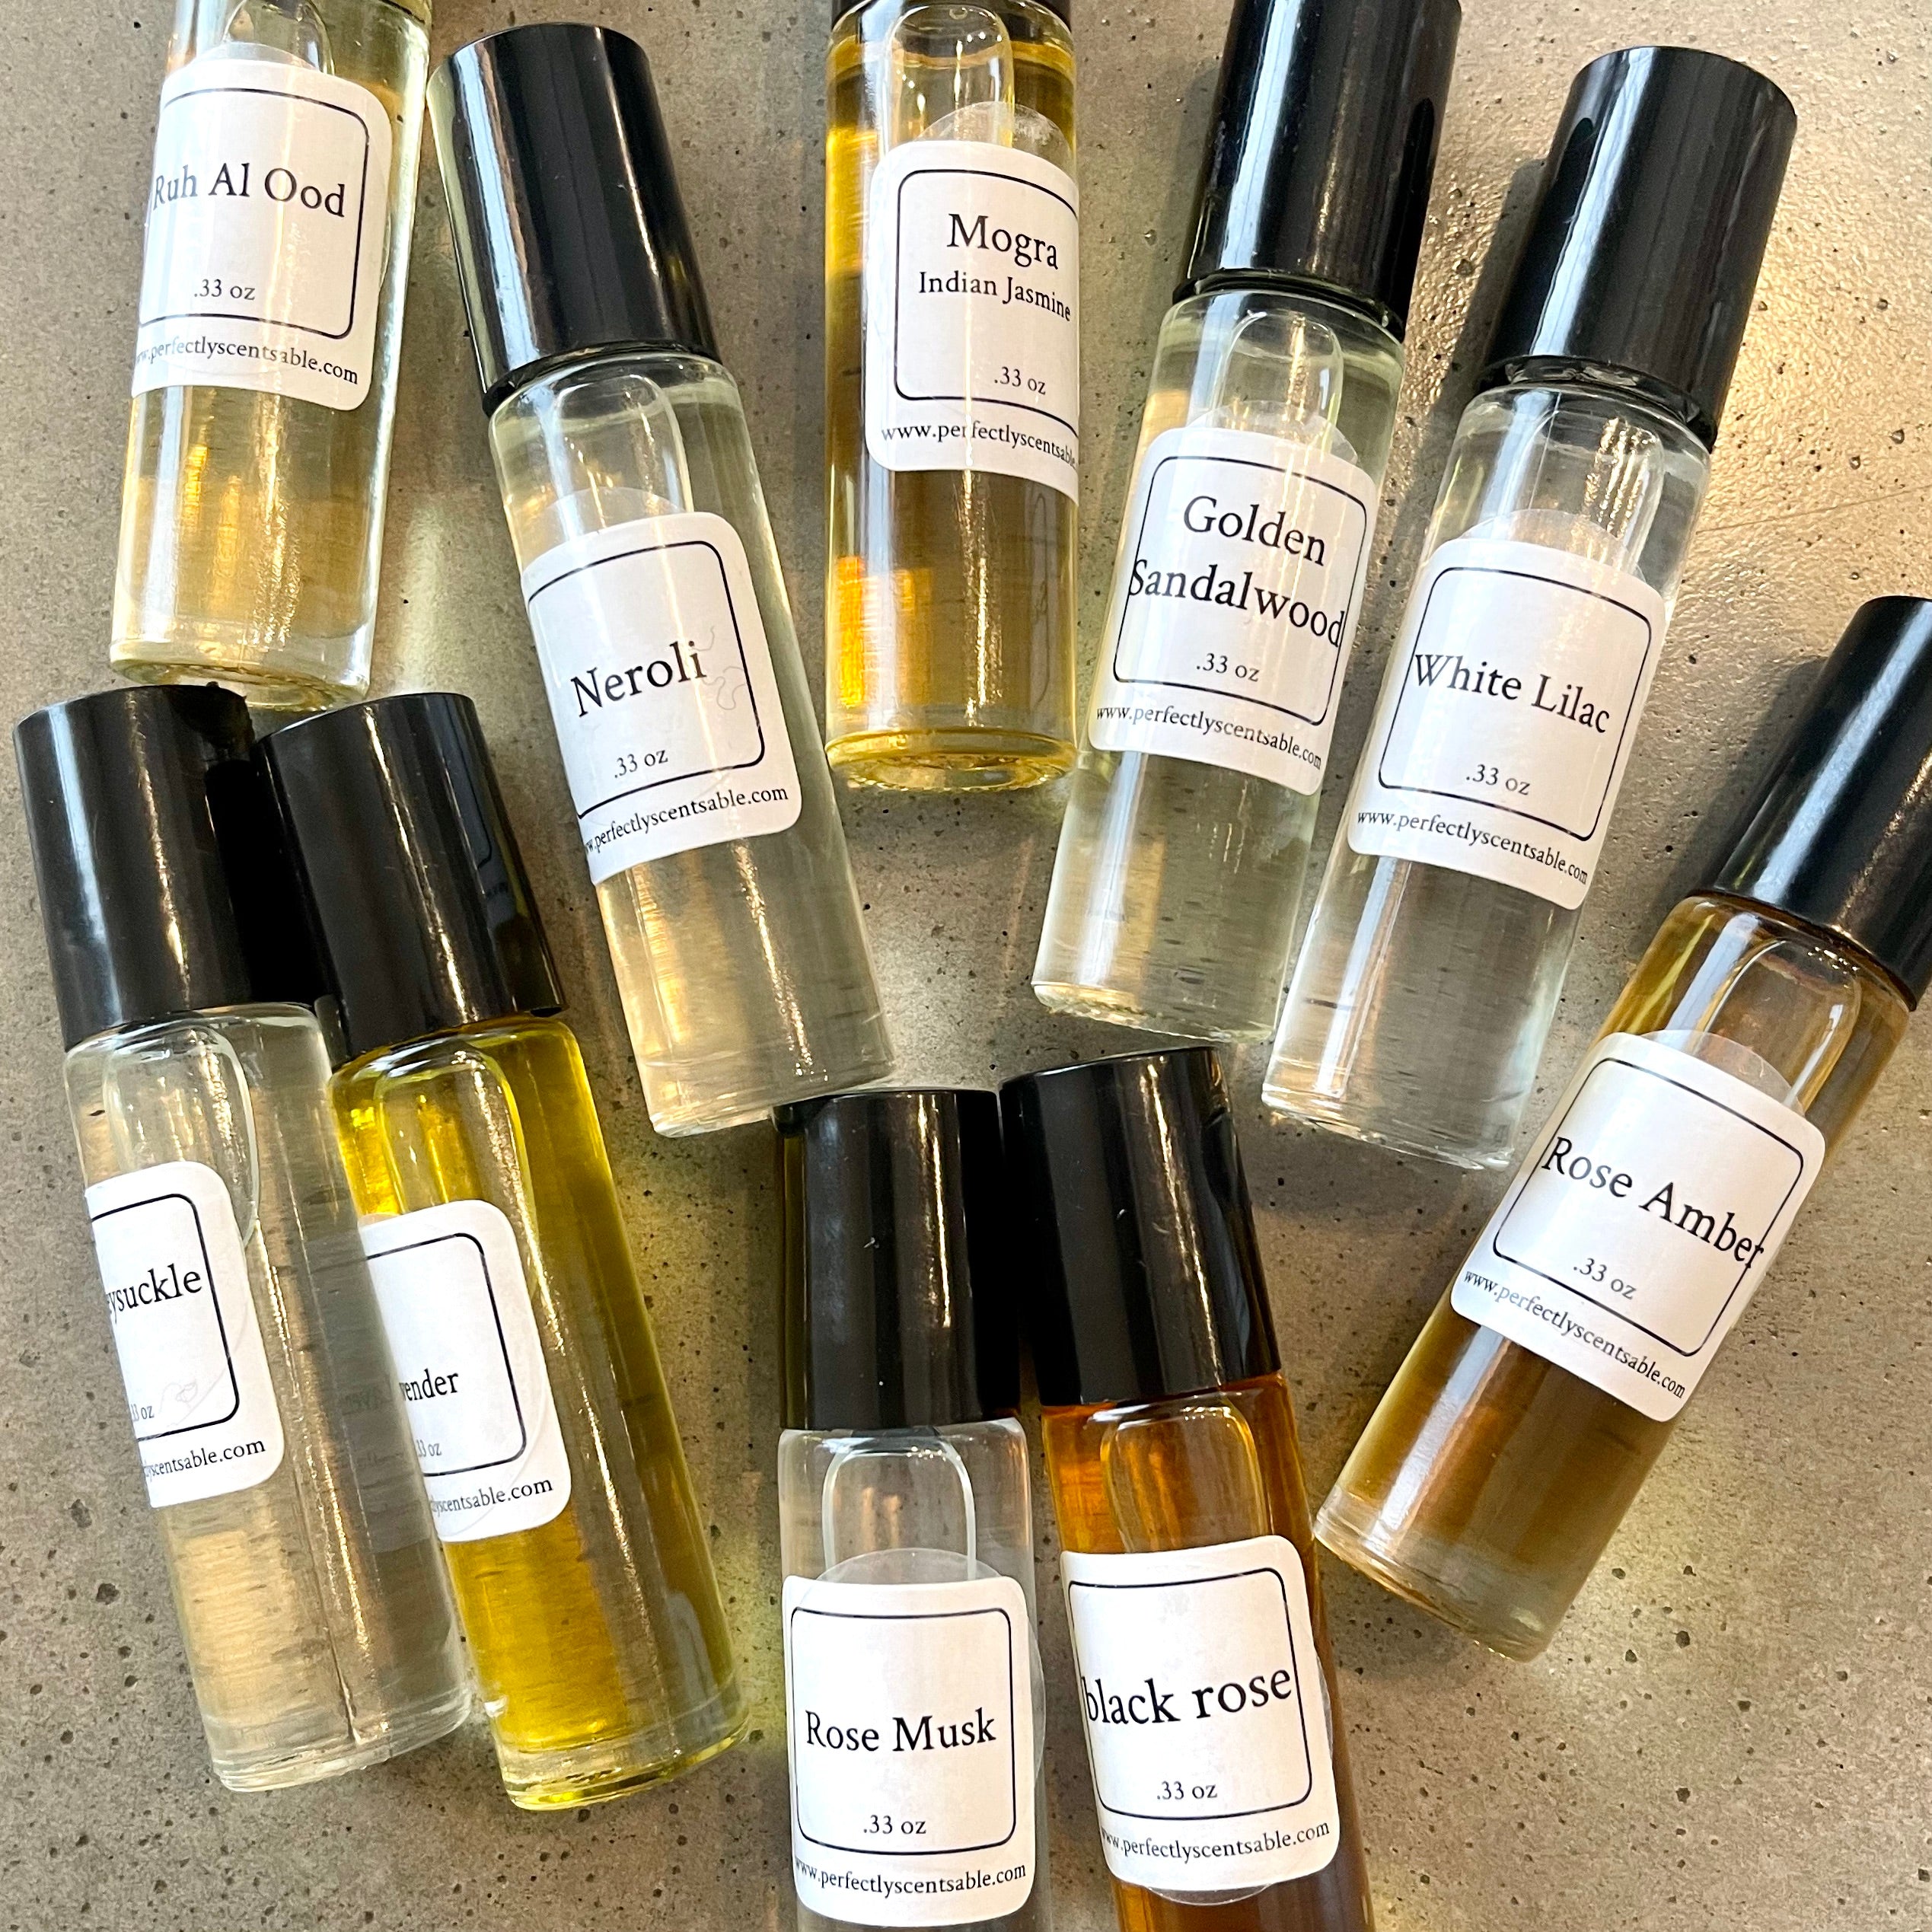 pier 1 imports amber musk oil dupes｜TikTok Search